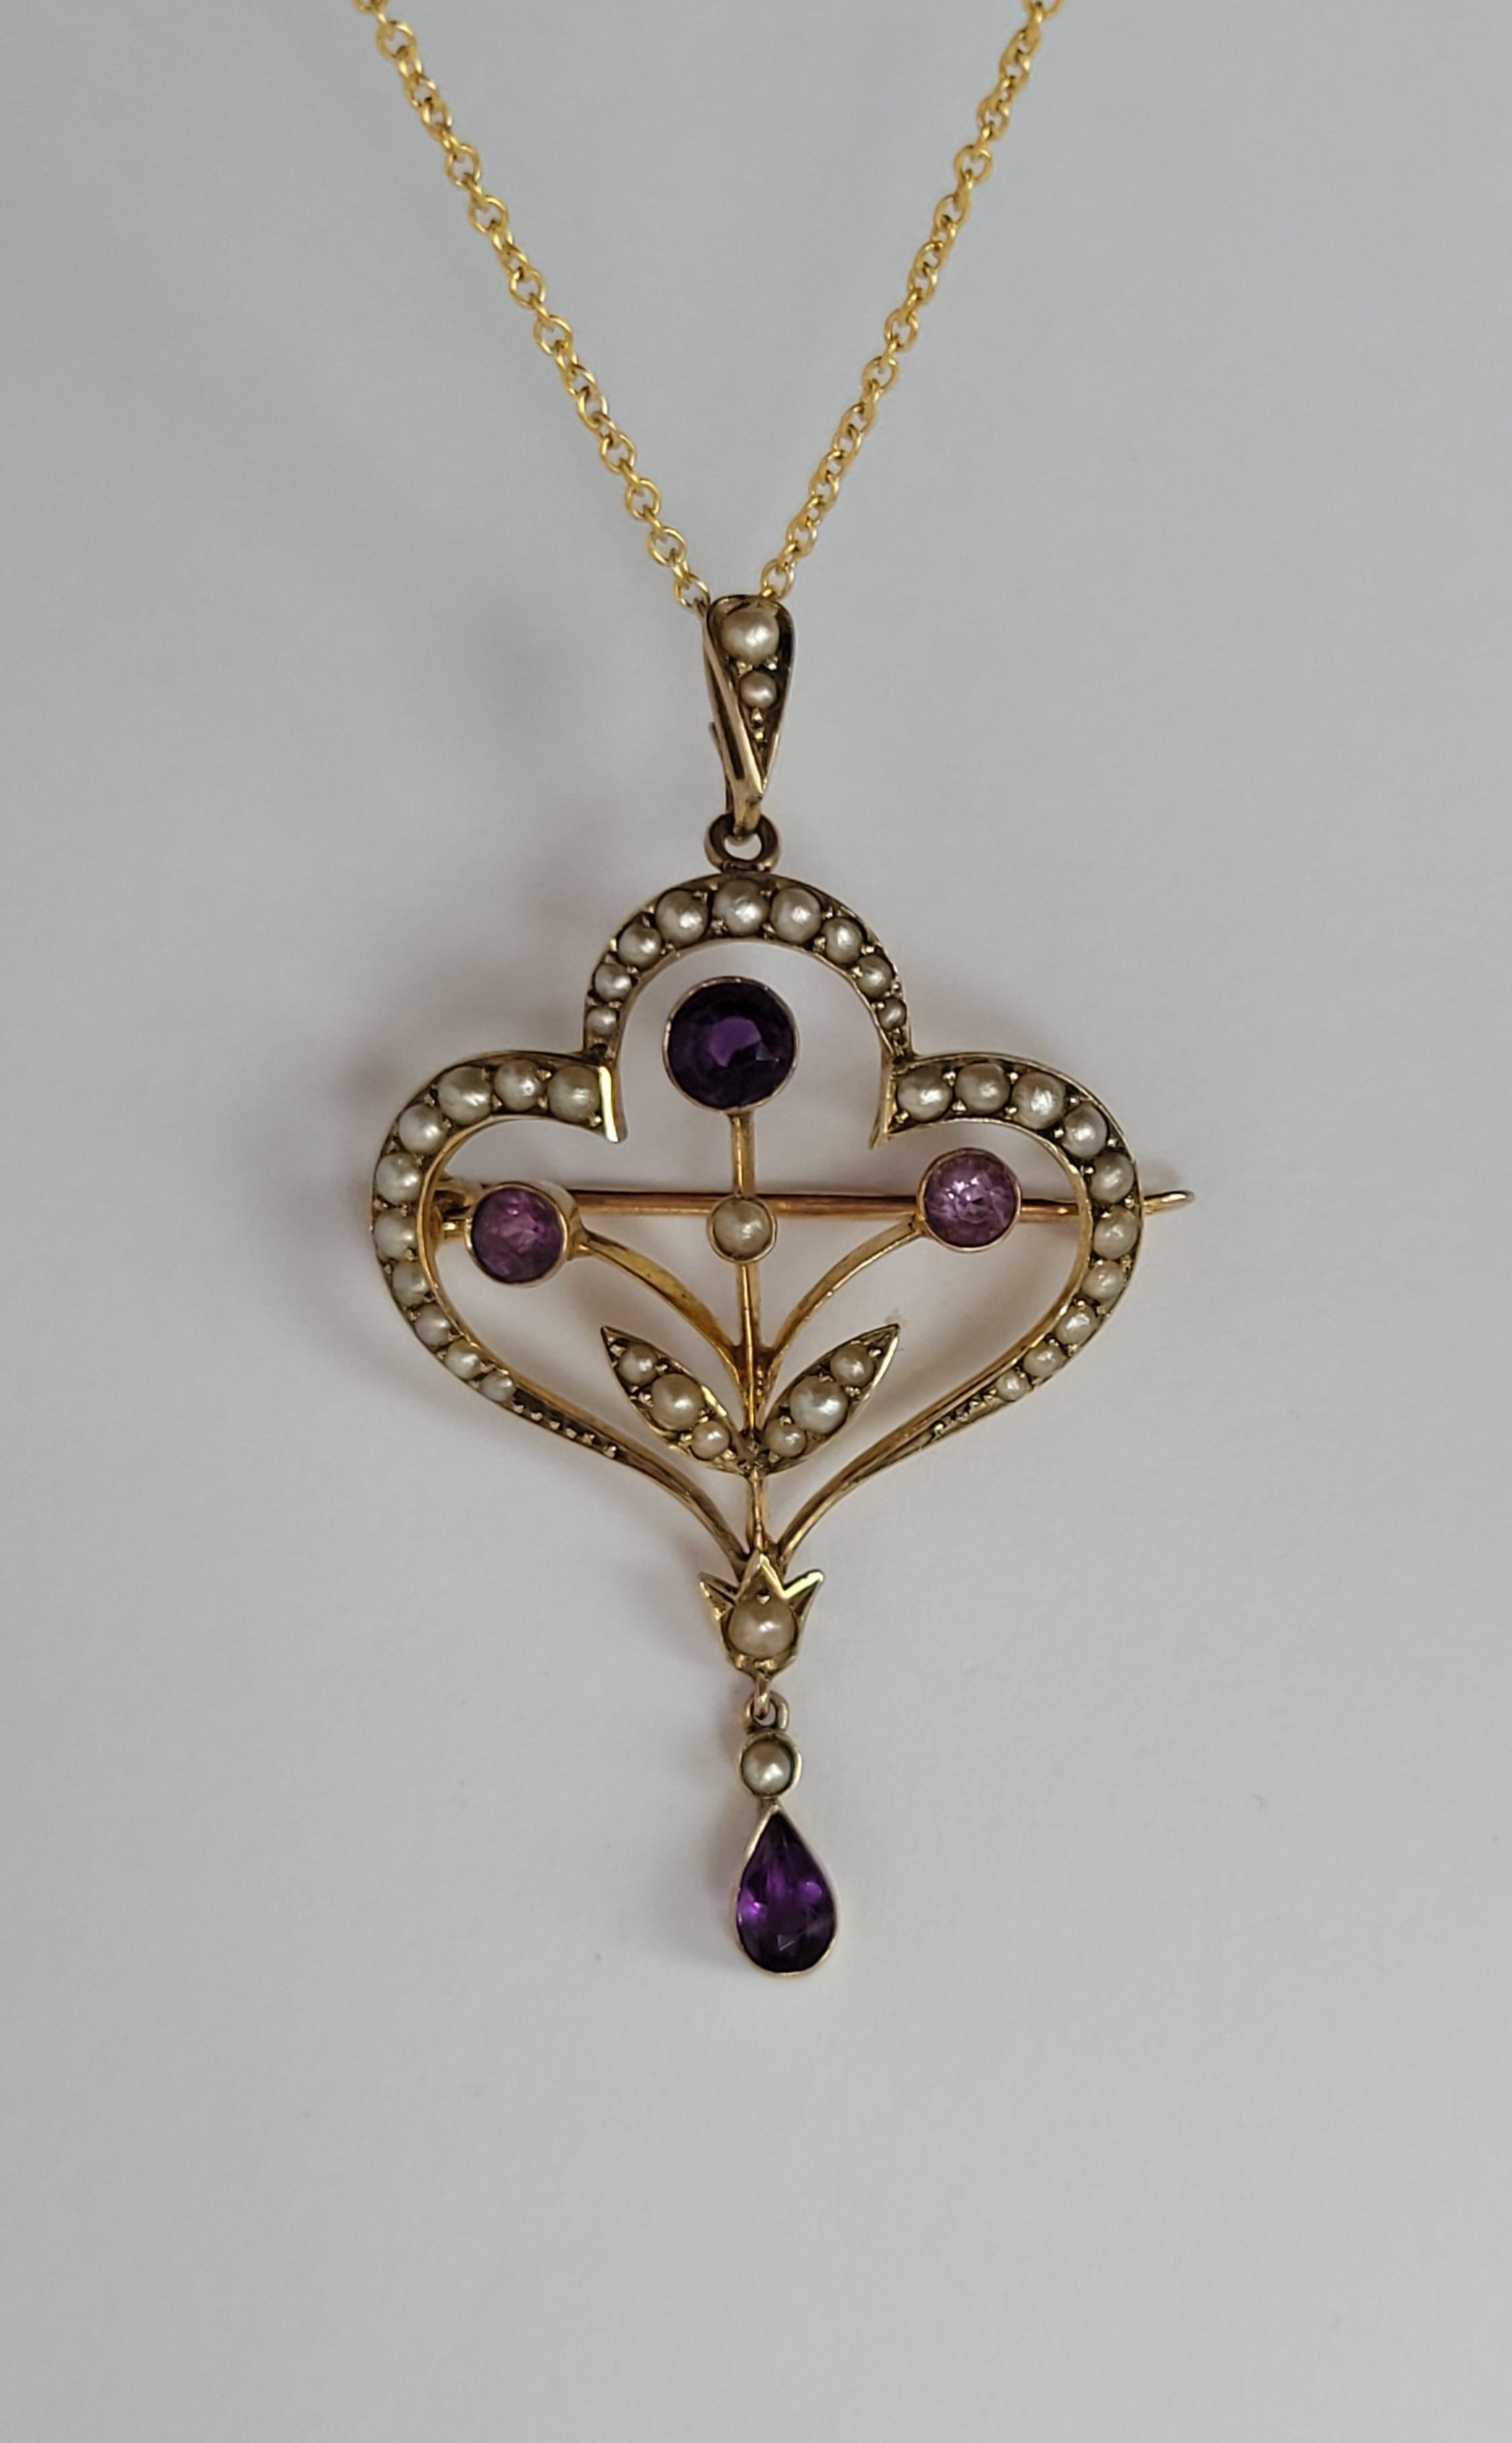 Antique Edwardian Amethyst Pearl Gold Brooch Pendant Necklace For Sale 6